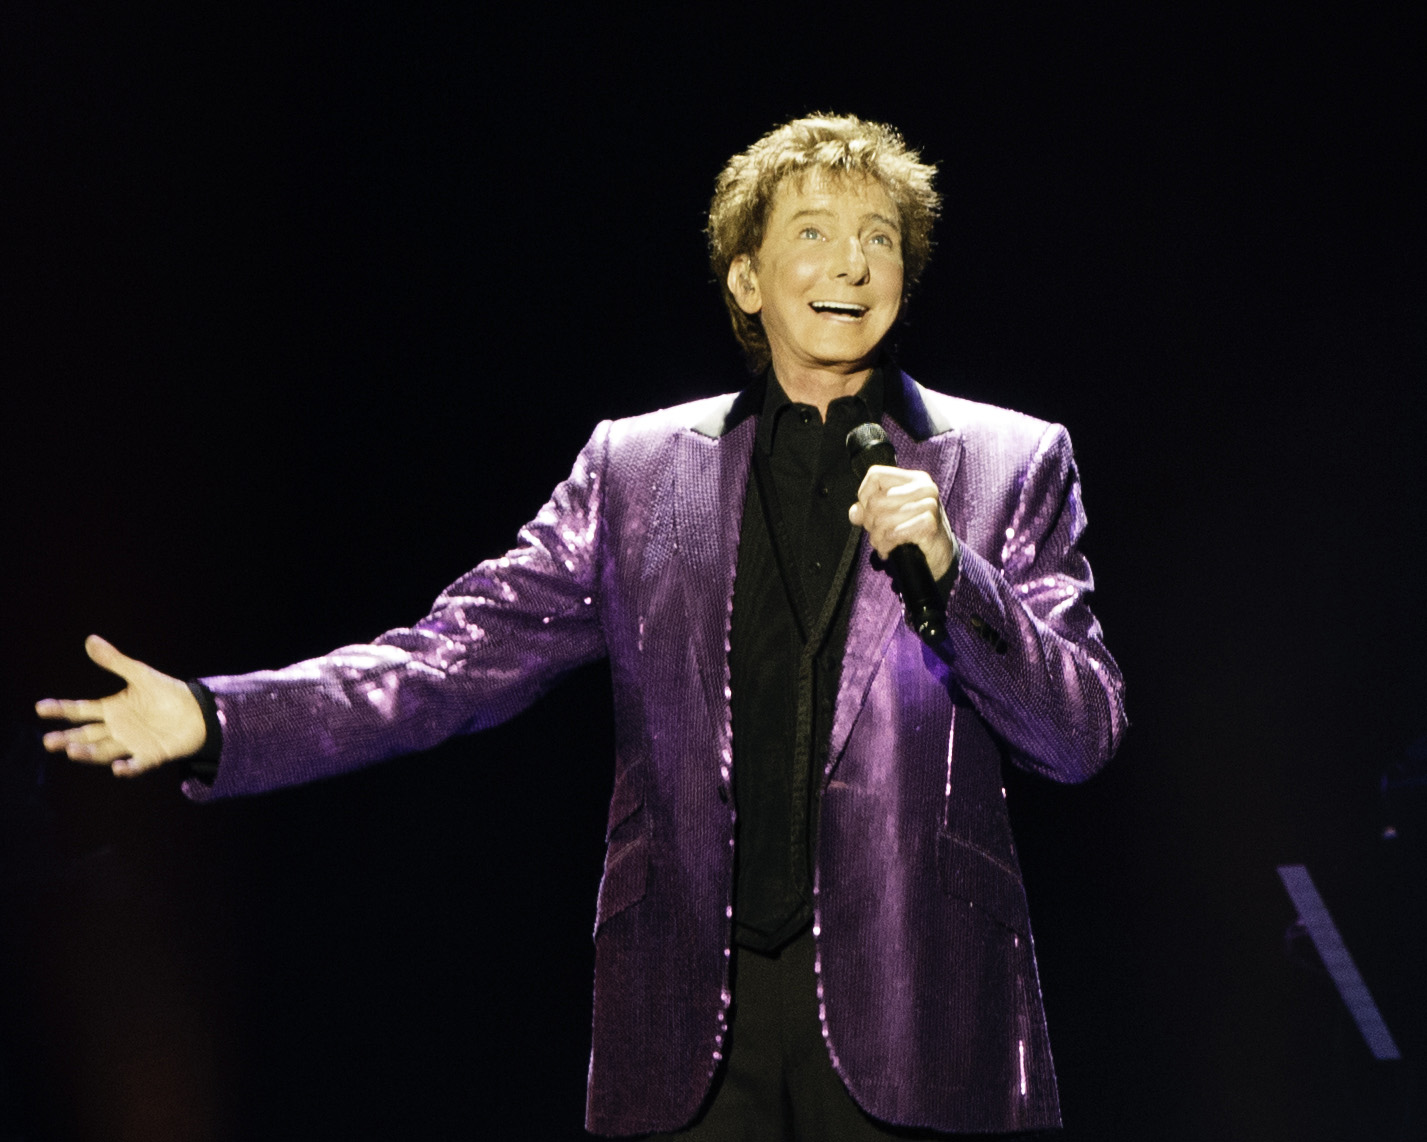 A fit Barry Manilow returns to San Antonio